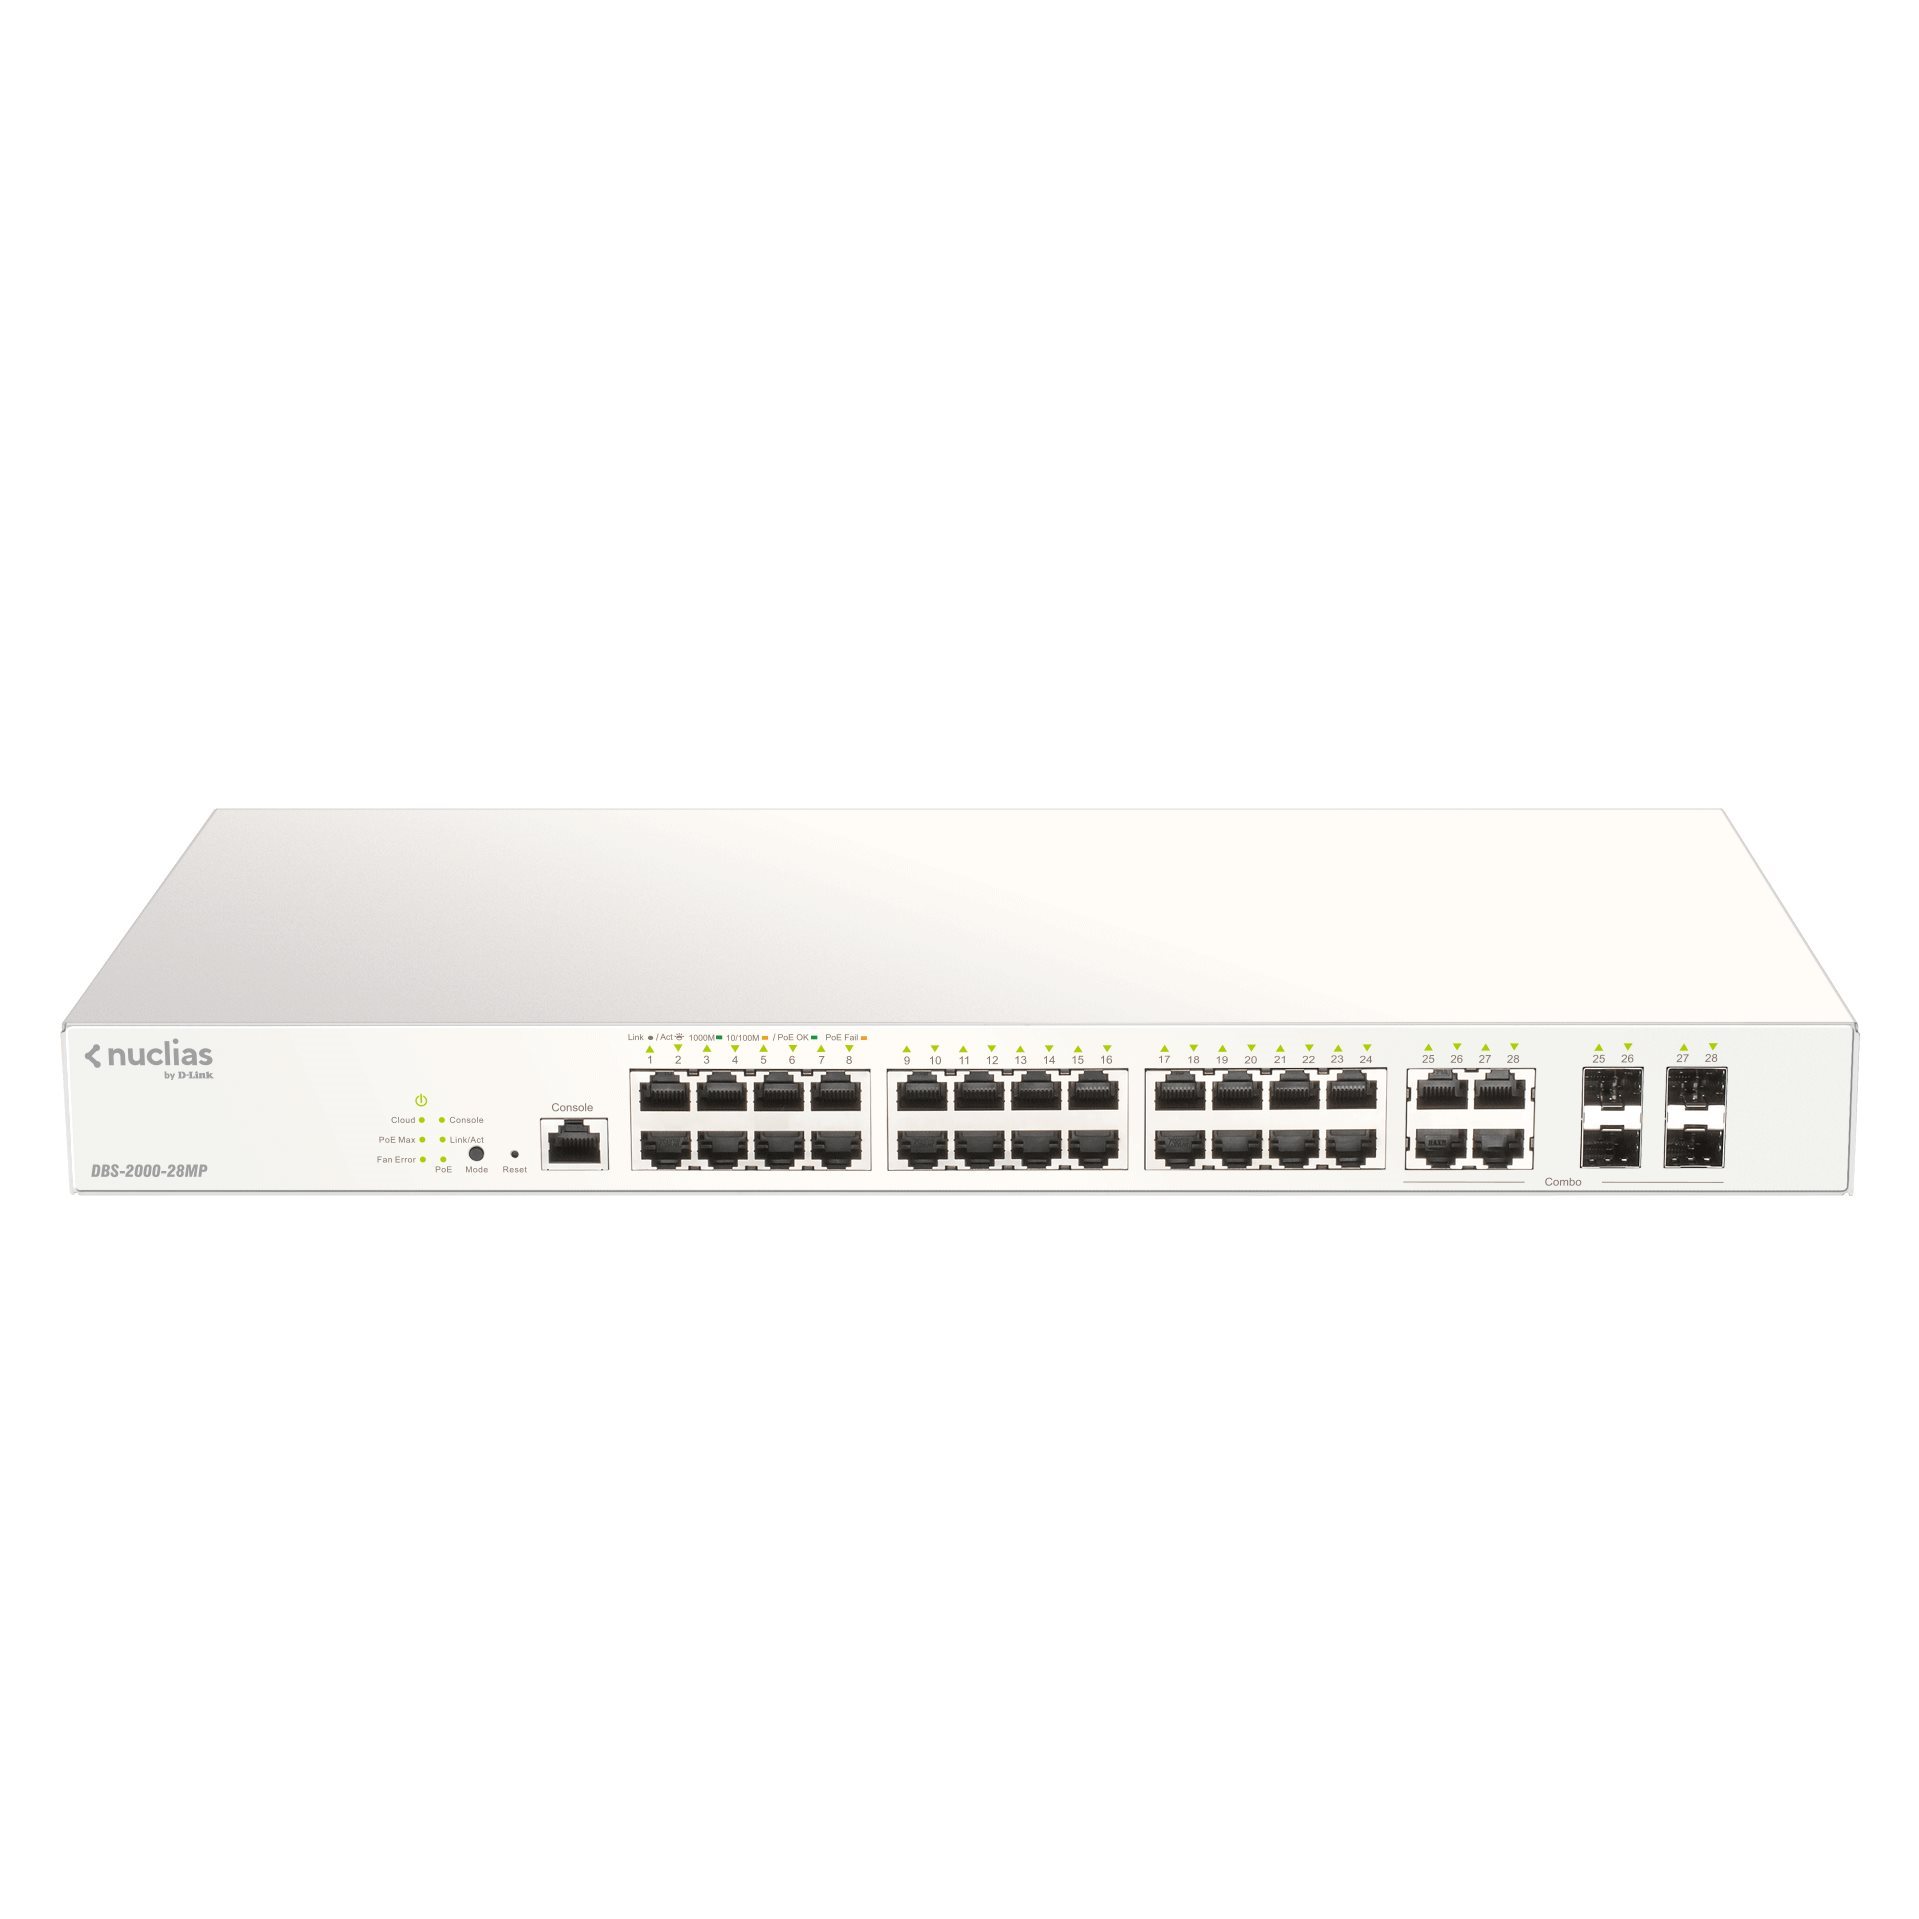   Switch ethernet   Nuclias Switch 24 Giga PoE at 370W + 4 Combo SFP DBS-2000-28MP